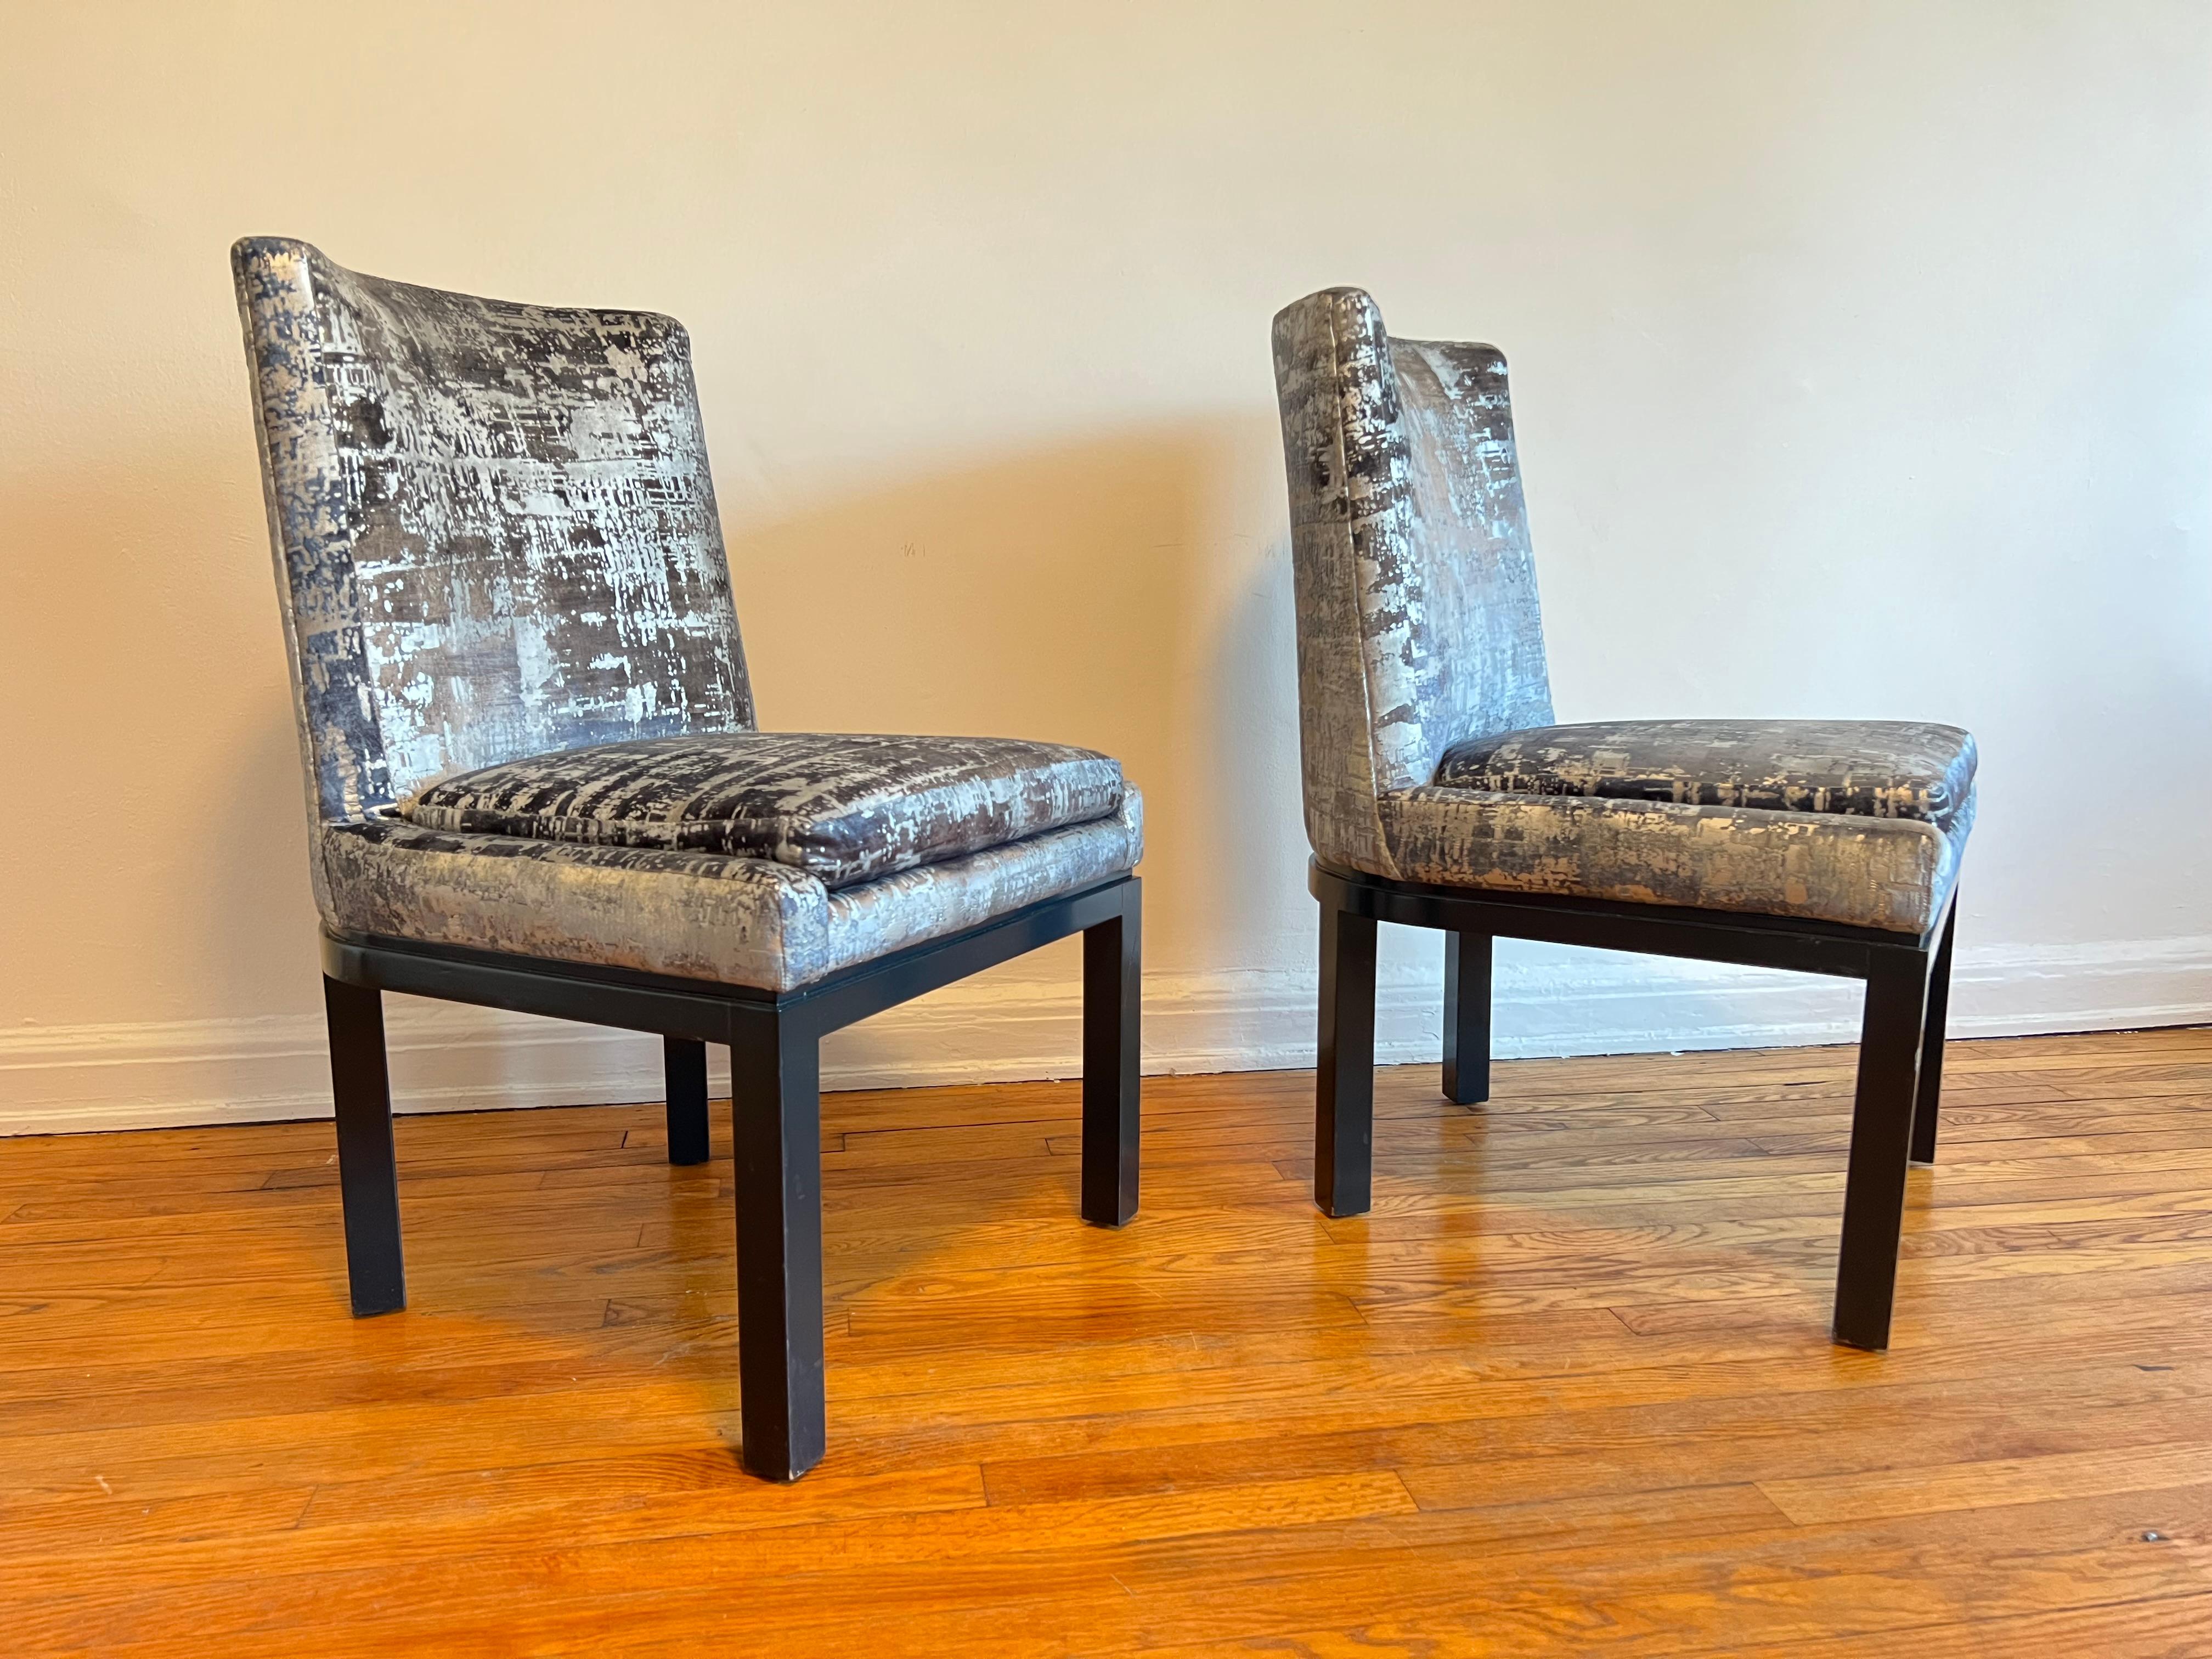 Vladimir Kagan rare pair of dining and / or side chairs. Model 7311, or known as the Key Chair, these were designed and manufactured by Vladimir Kagan within his studio in 1972. 

They feature legs and a back barrel of his classic cubist approach